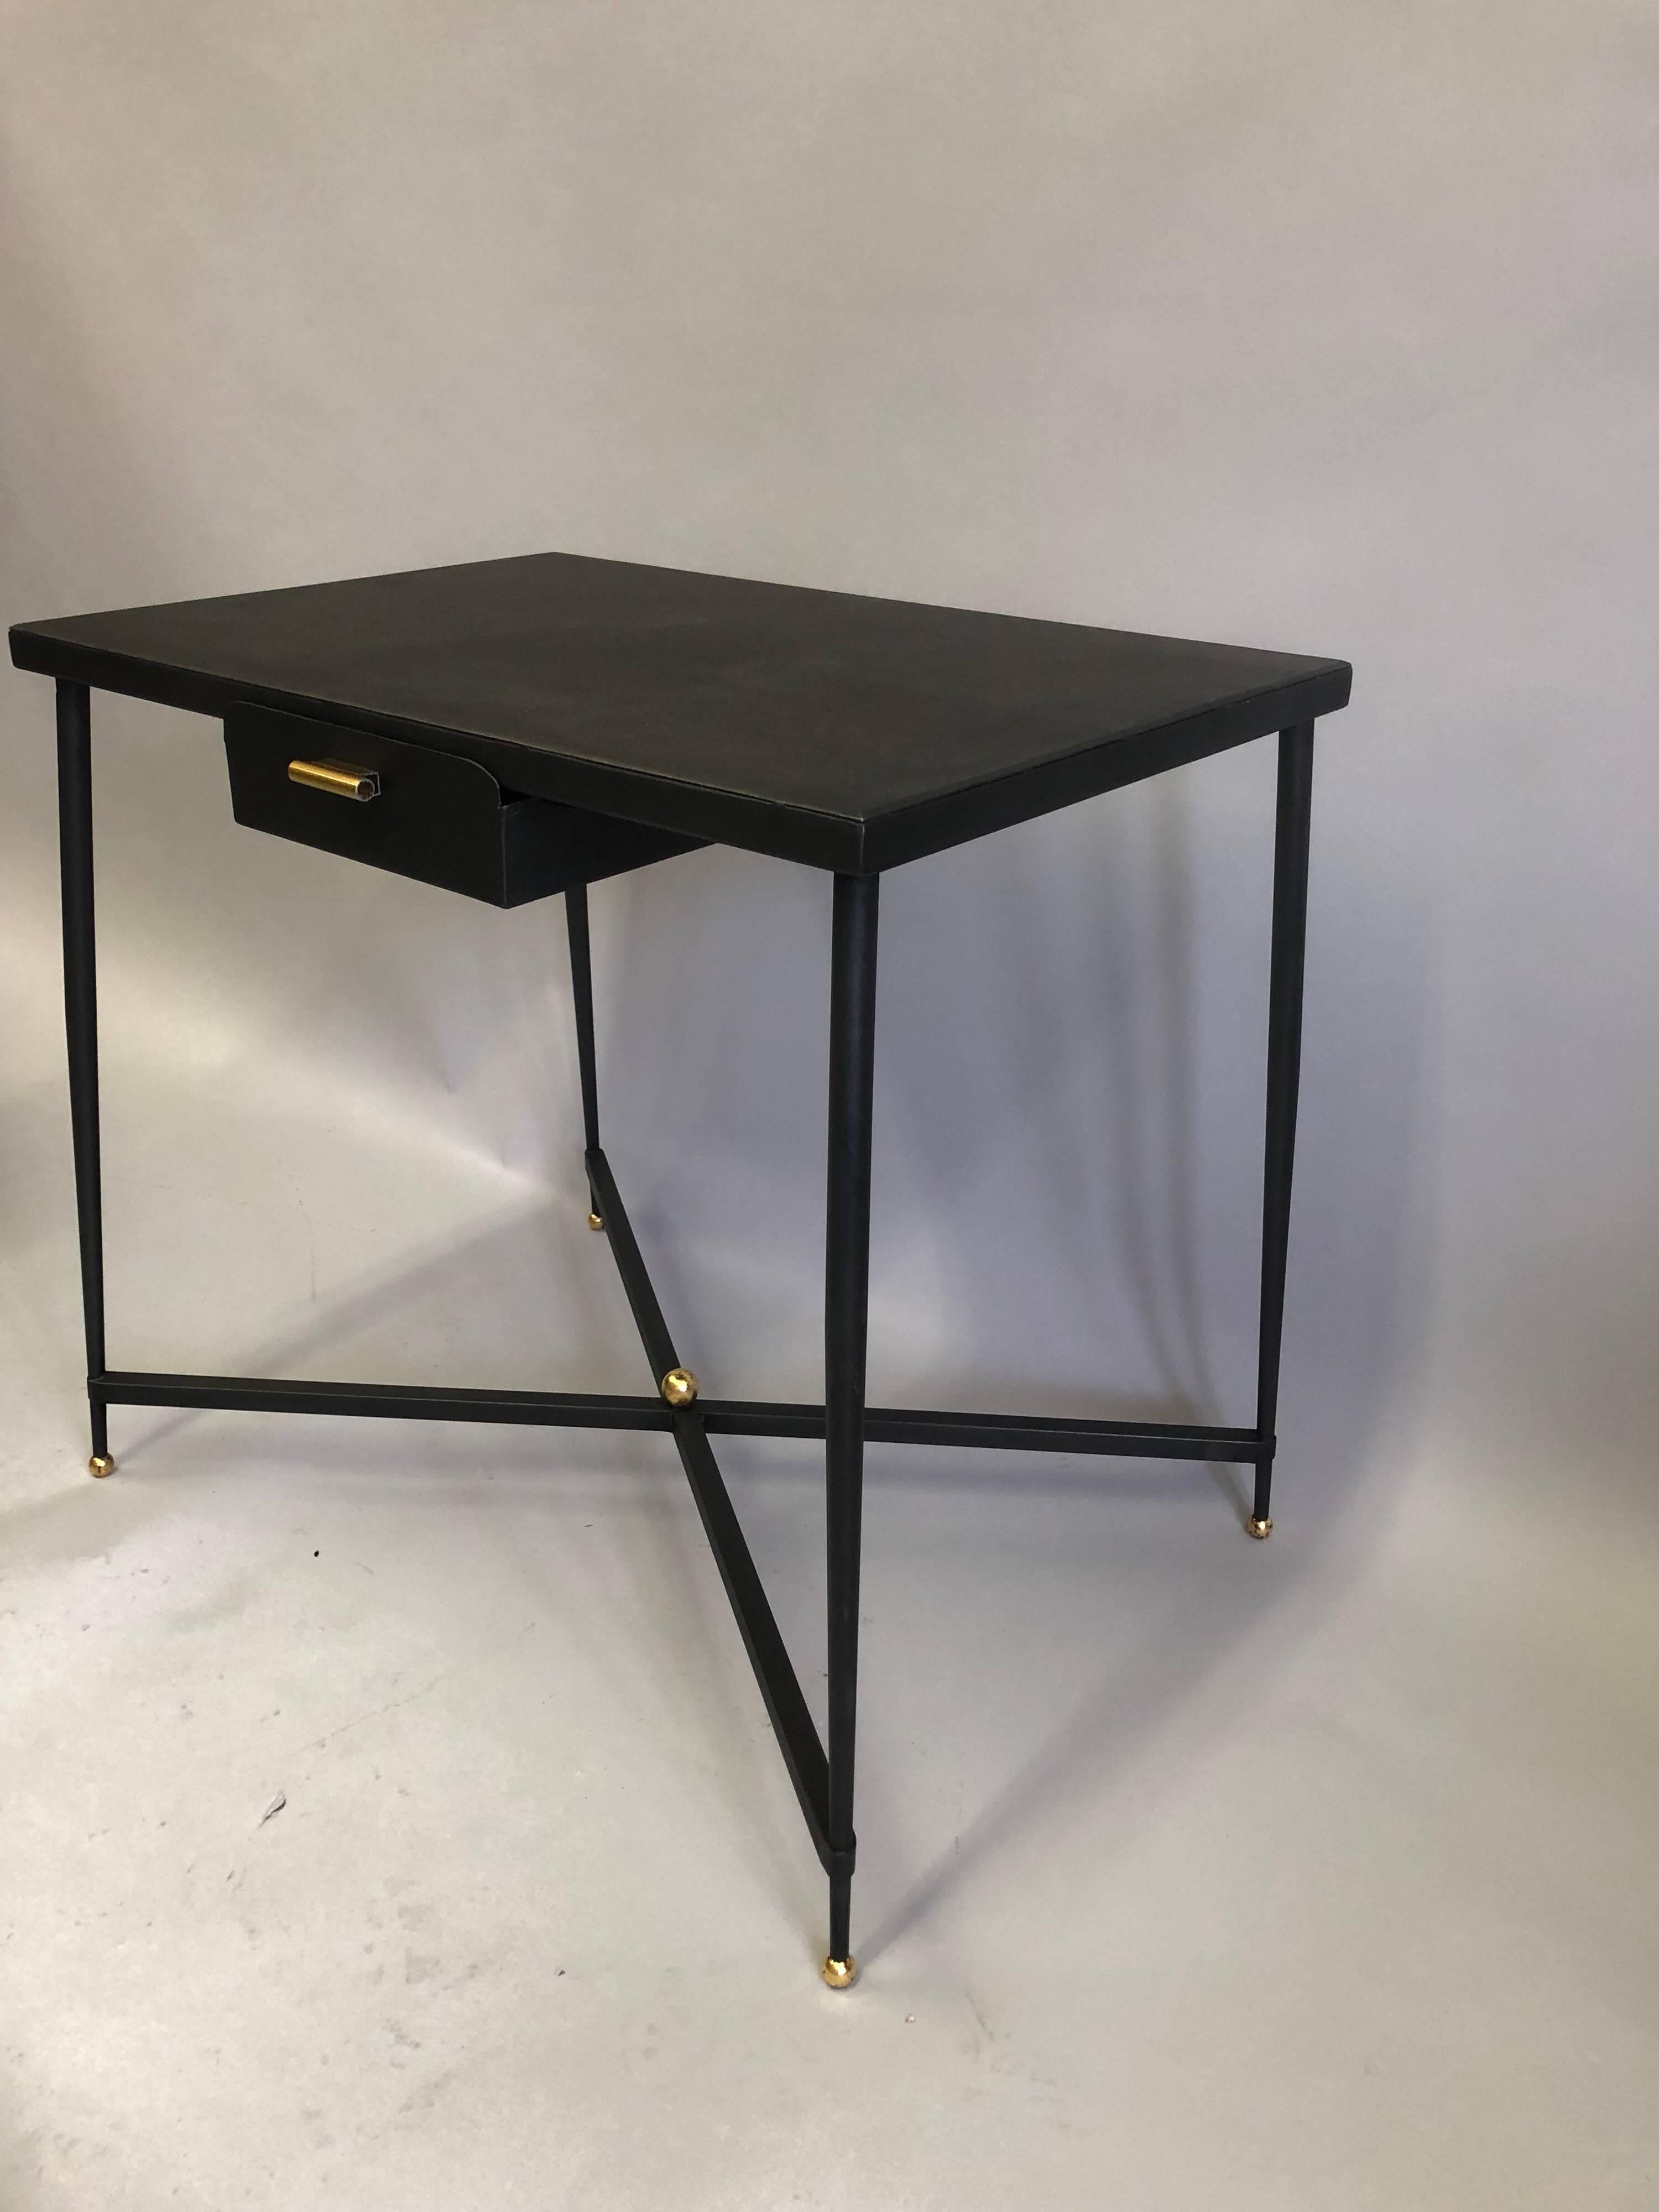 20th Century French Midcentury Steel and Brass Desk with Leather Desk Chair by Jacques Adnet